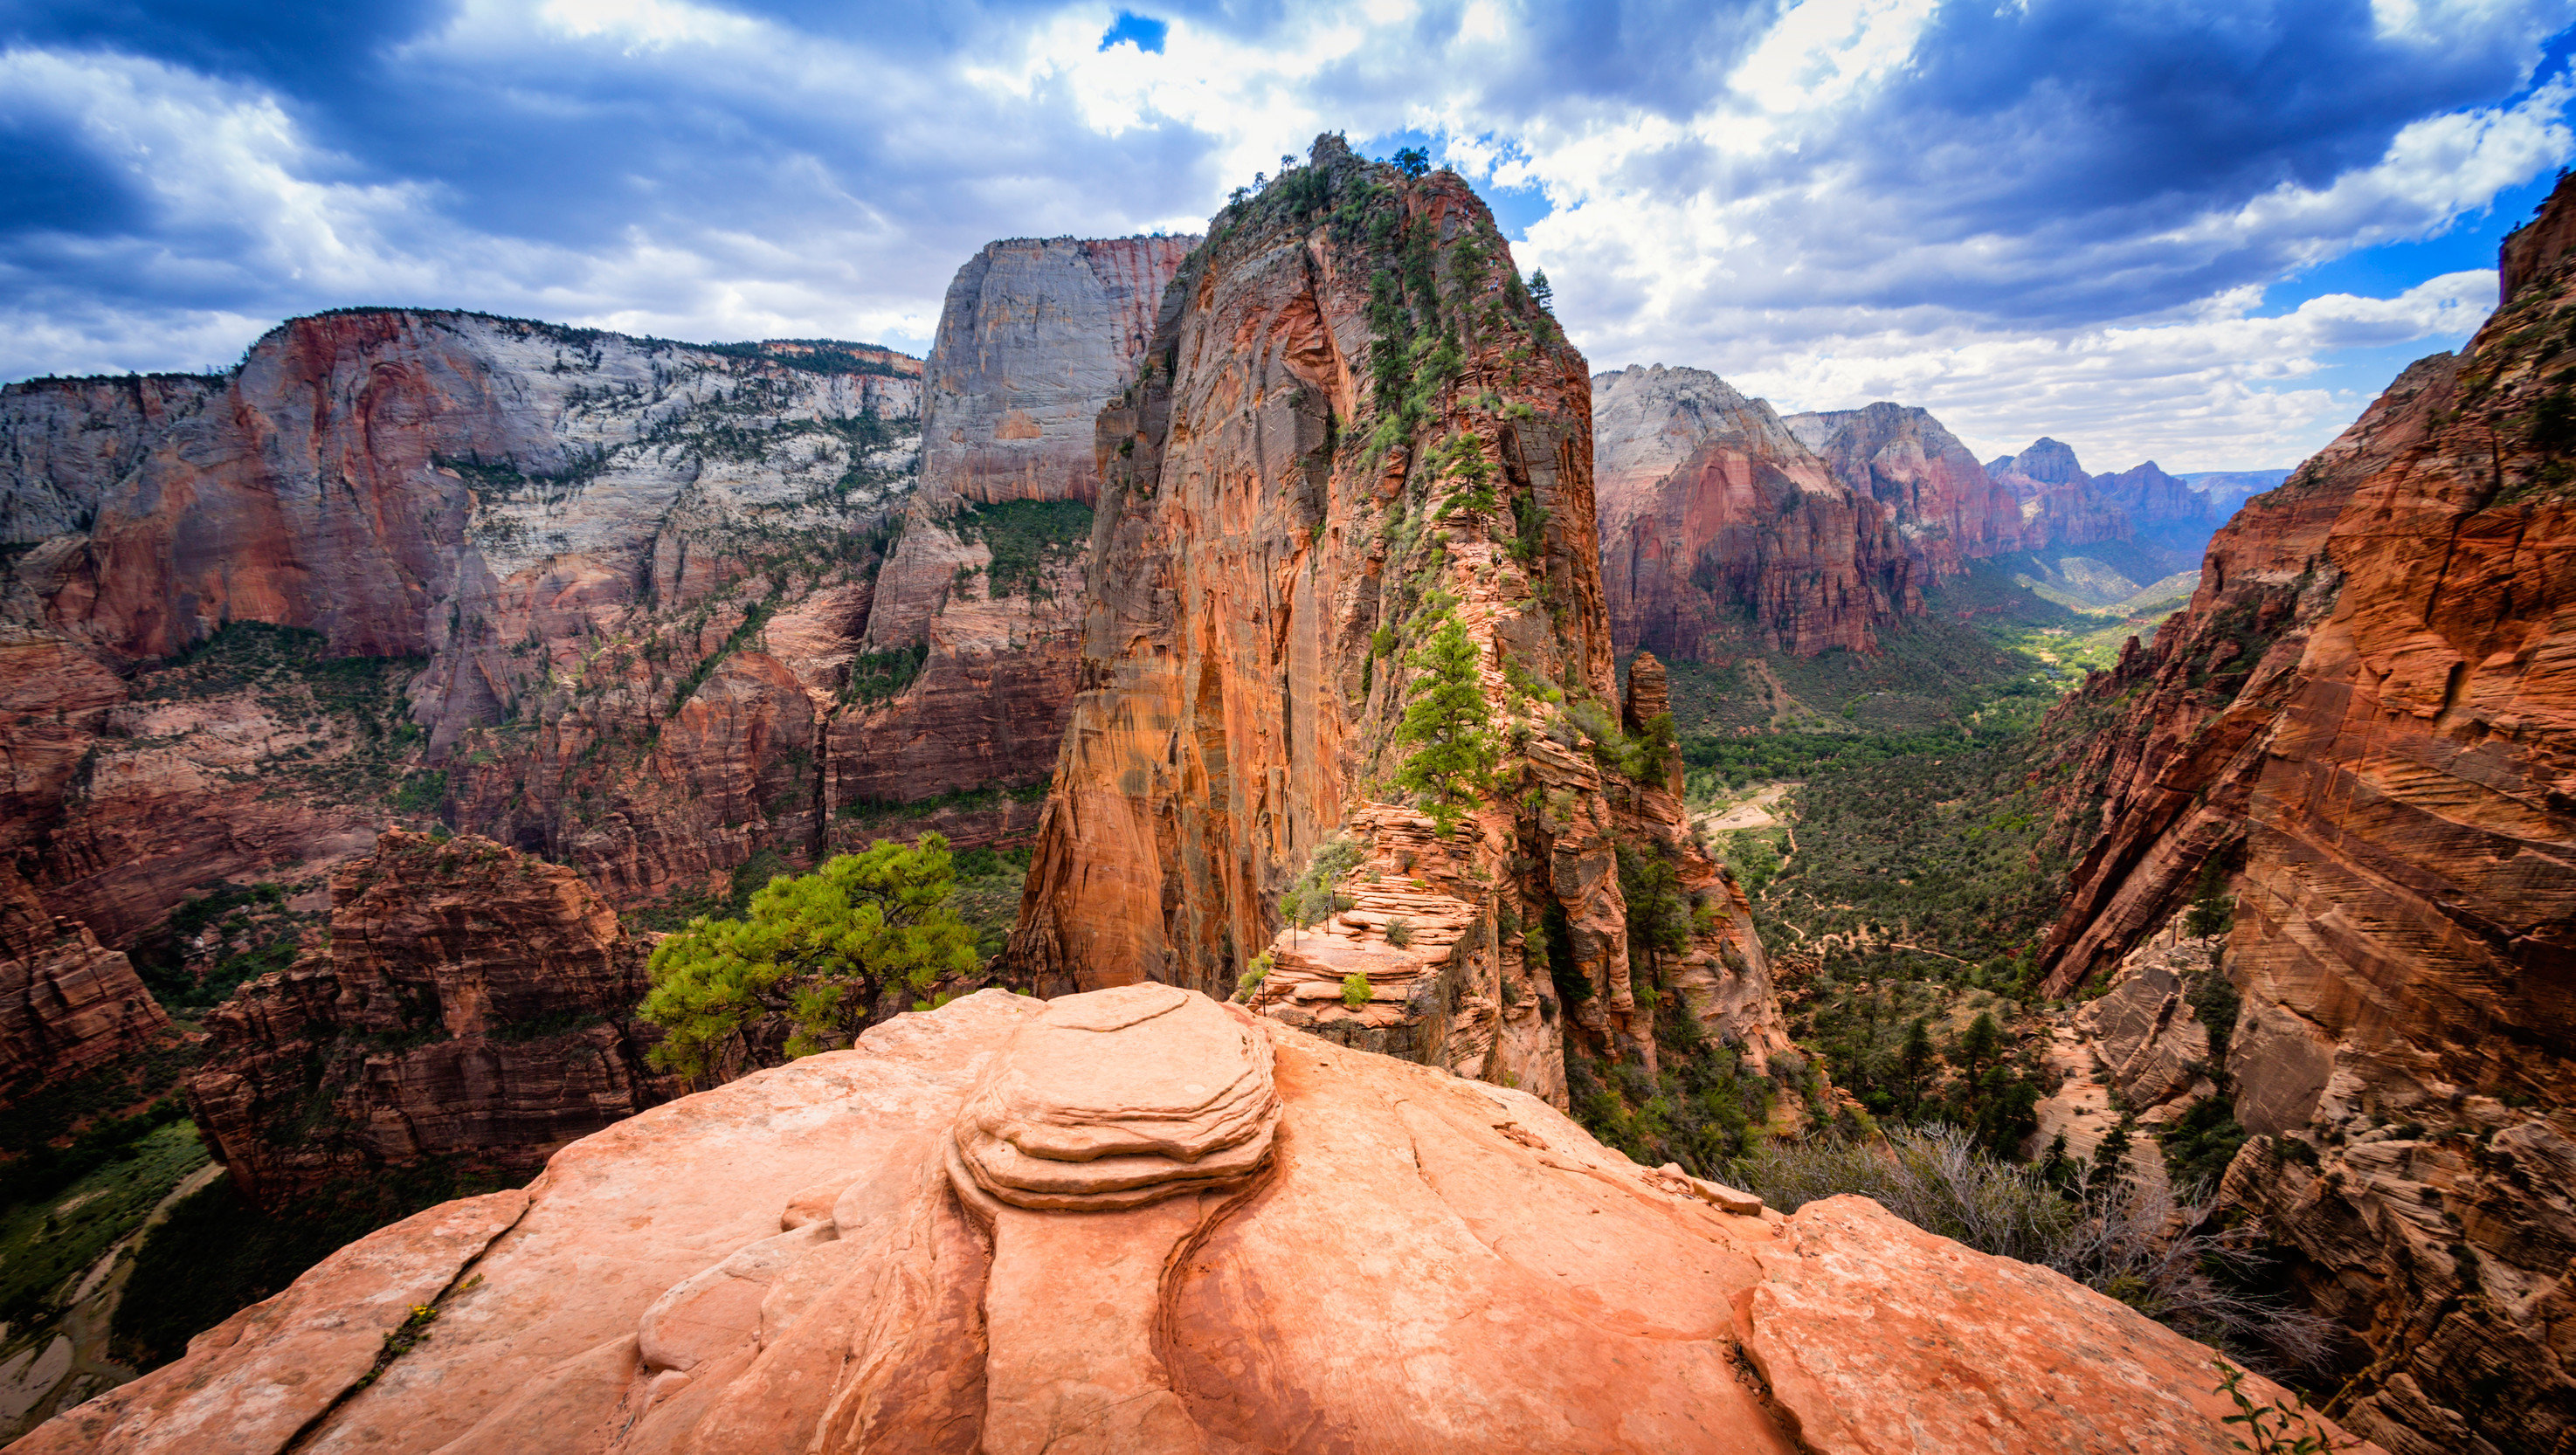 A Beginner's Guide to Hiking Zion National Park